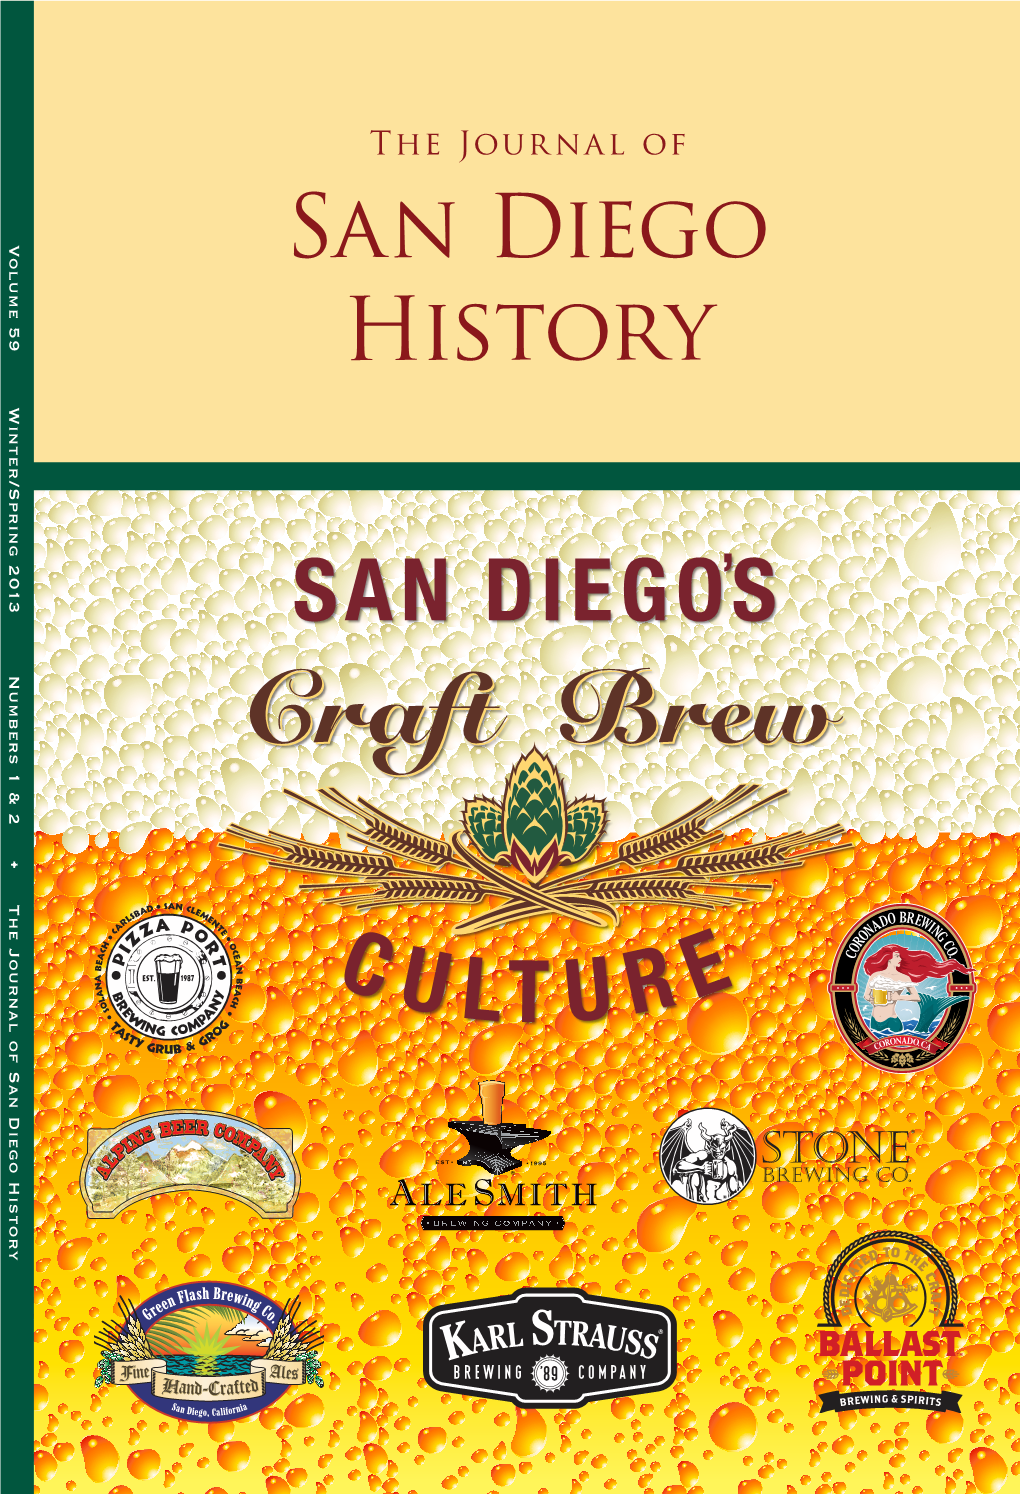 San Diego History Center Is a Museum, Education Center, and Research Library Your Contribution Founded As the San Diego Historical Society in 1928